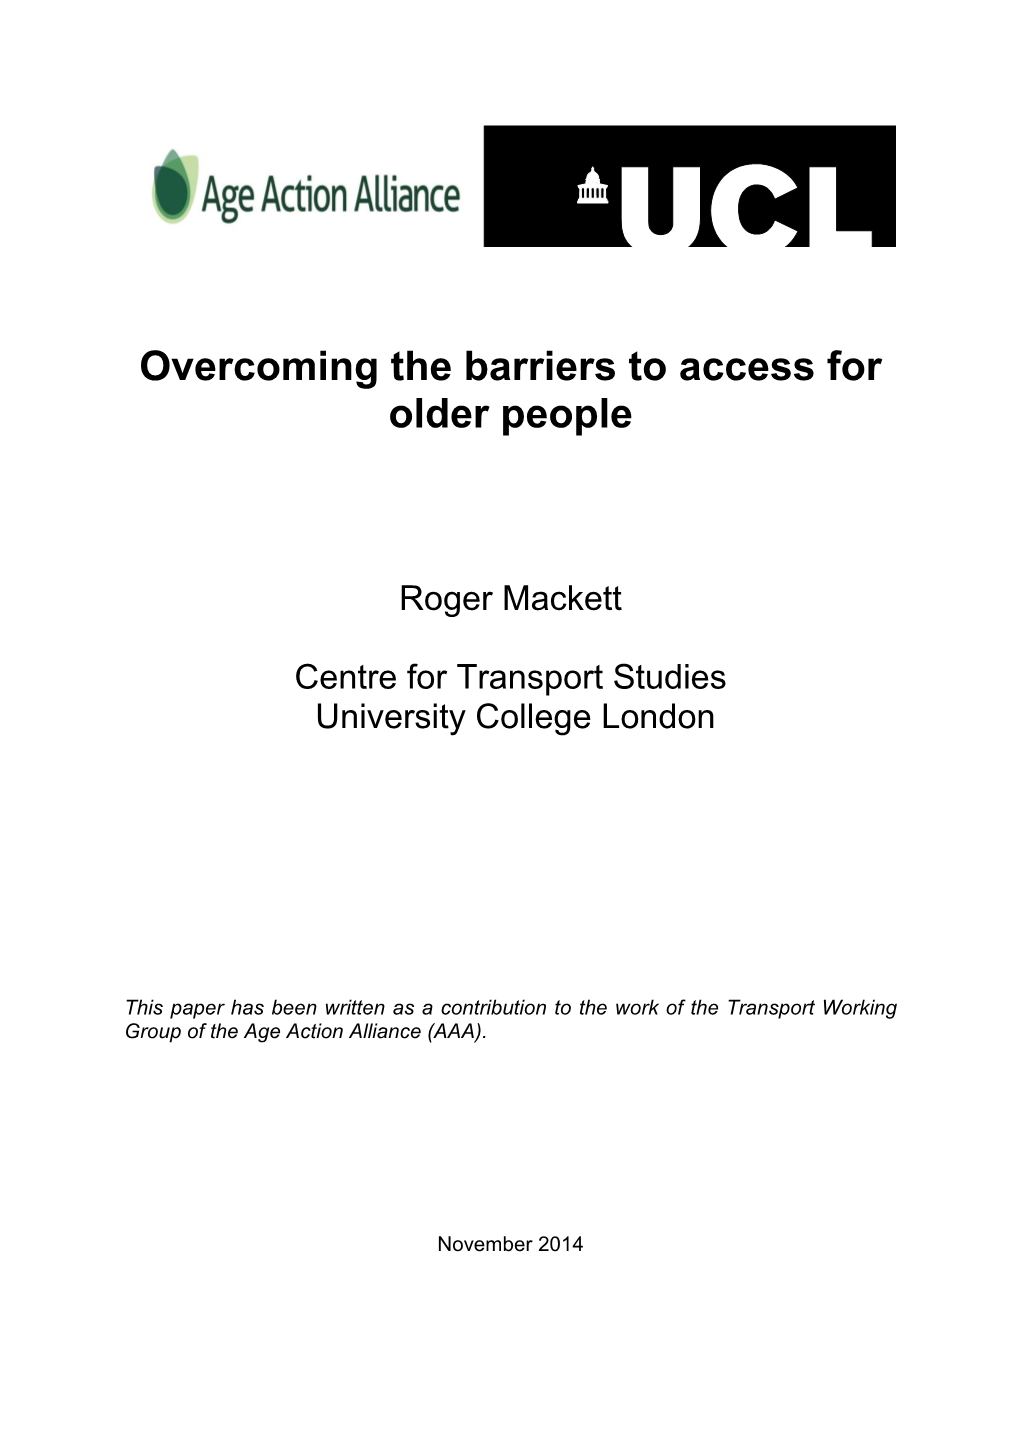 Overcoming the Barriers to Access for Older People